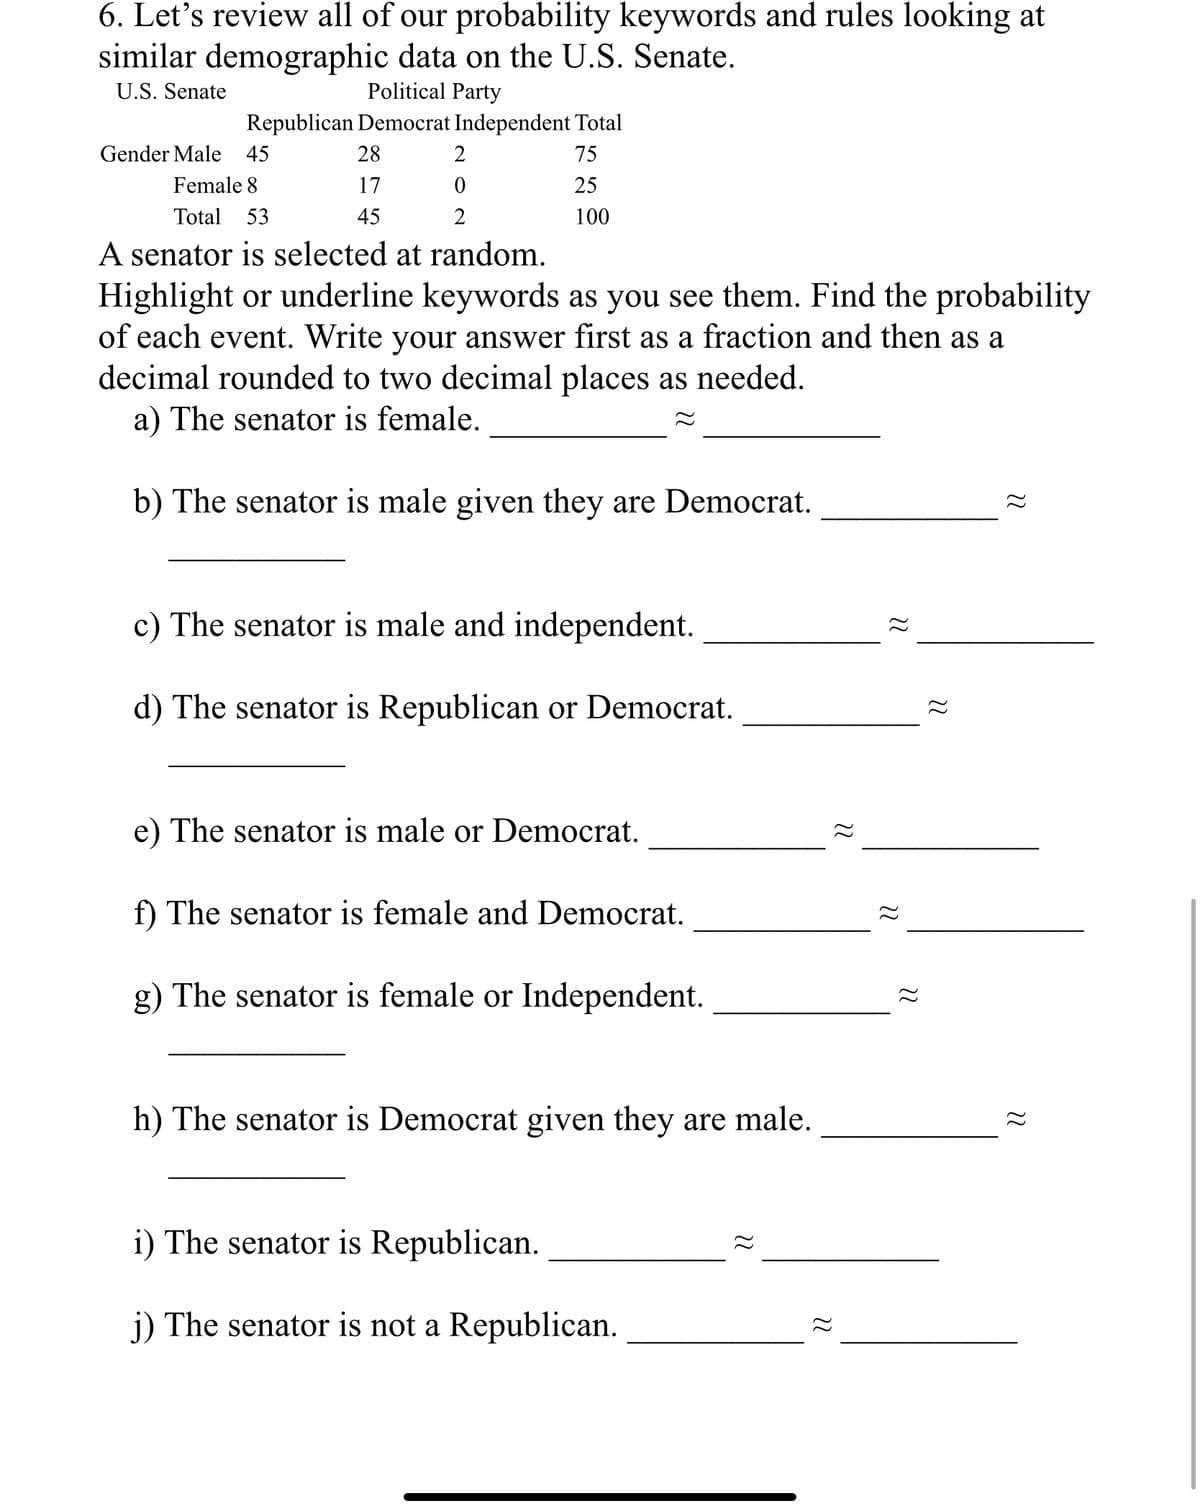 6. Let's review all of our probability keywords and rules looking at
similar demographic data on the U.S. Senate.
U.S. Senate
Political Party
Republican Democrat Independent Total
75
25
100
28
17
45
Gender Male 45
Female 8
Total 53
A senator is selected at random.
Highlight or underline keywords as you see them. Find the probability
of each event. Write your answer first as a fraction and then as a
decimal rounded to two decimal places as needed.
a) The senator is female.
2
0
2
b) The senator is male given they are Democrat.
c) The senator is male and independent.
d) The senator is Republican or Democrat.
e) The senator is male or Democrat.
f) The senator is female and Democrat.
g) The senator is female or Independent.
h) The senator is Democrat given they are male.
i) The senator is Republican.
j) The senator is not a Republican.
22
22
22
22
22
22
22